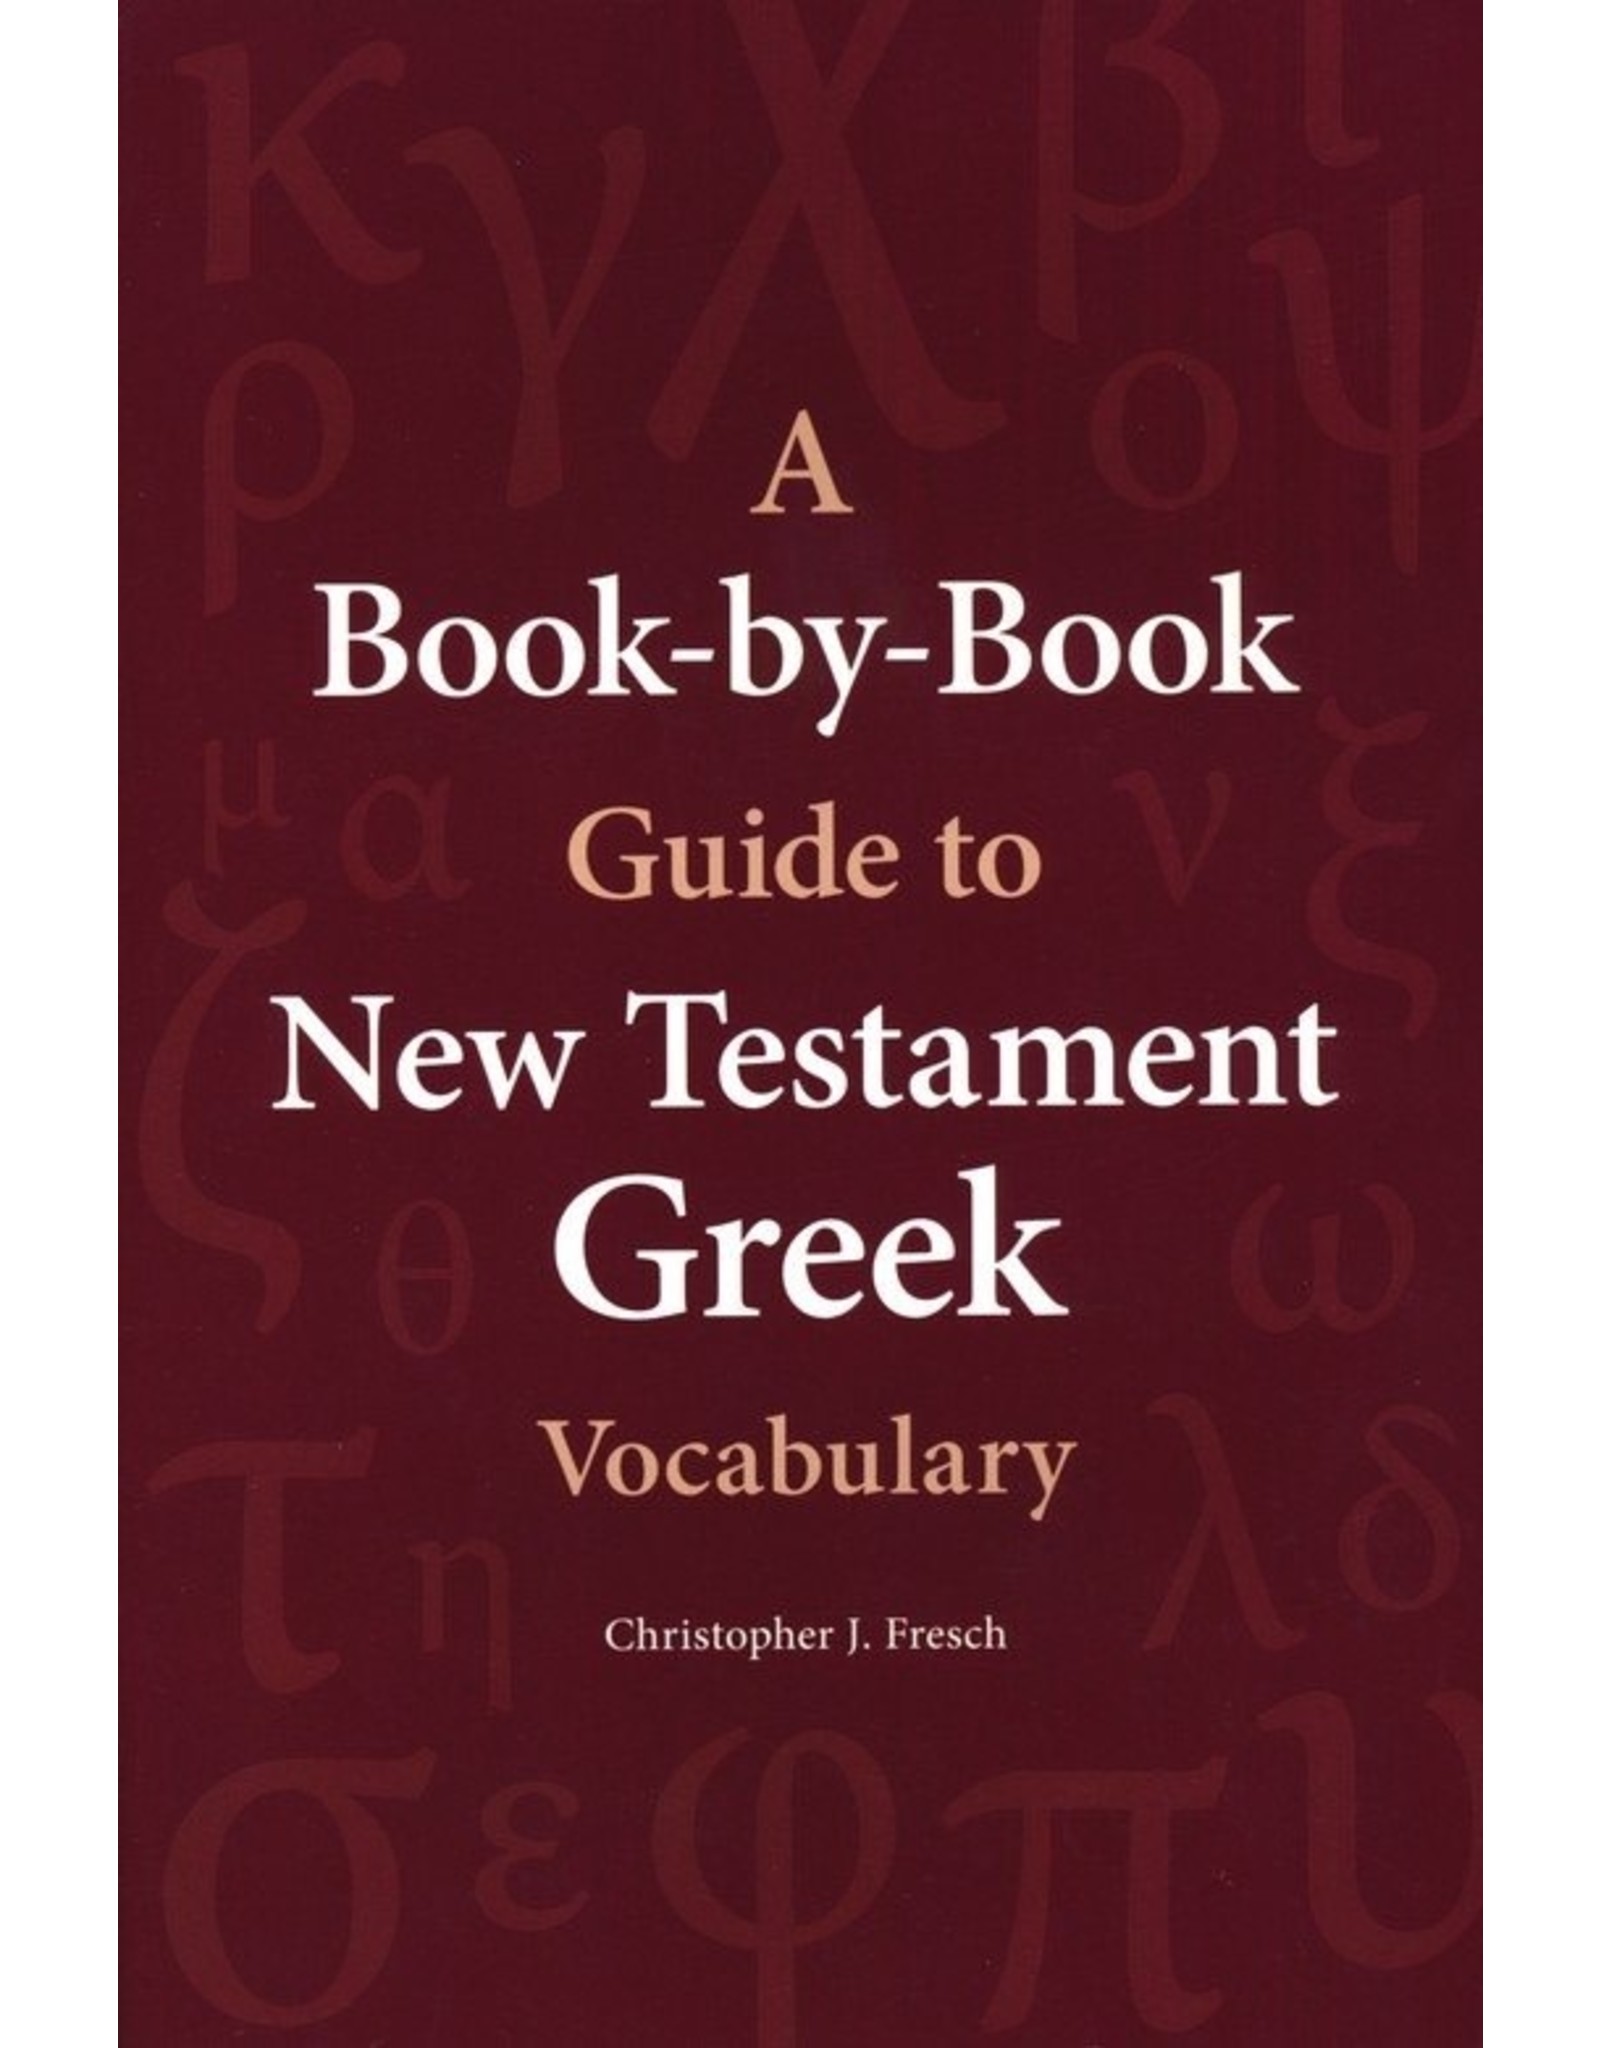 Hendrickson A Book-by-Book Guide to New Testament Greek Vocabulary